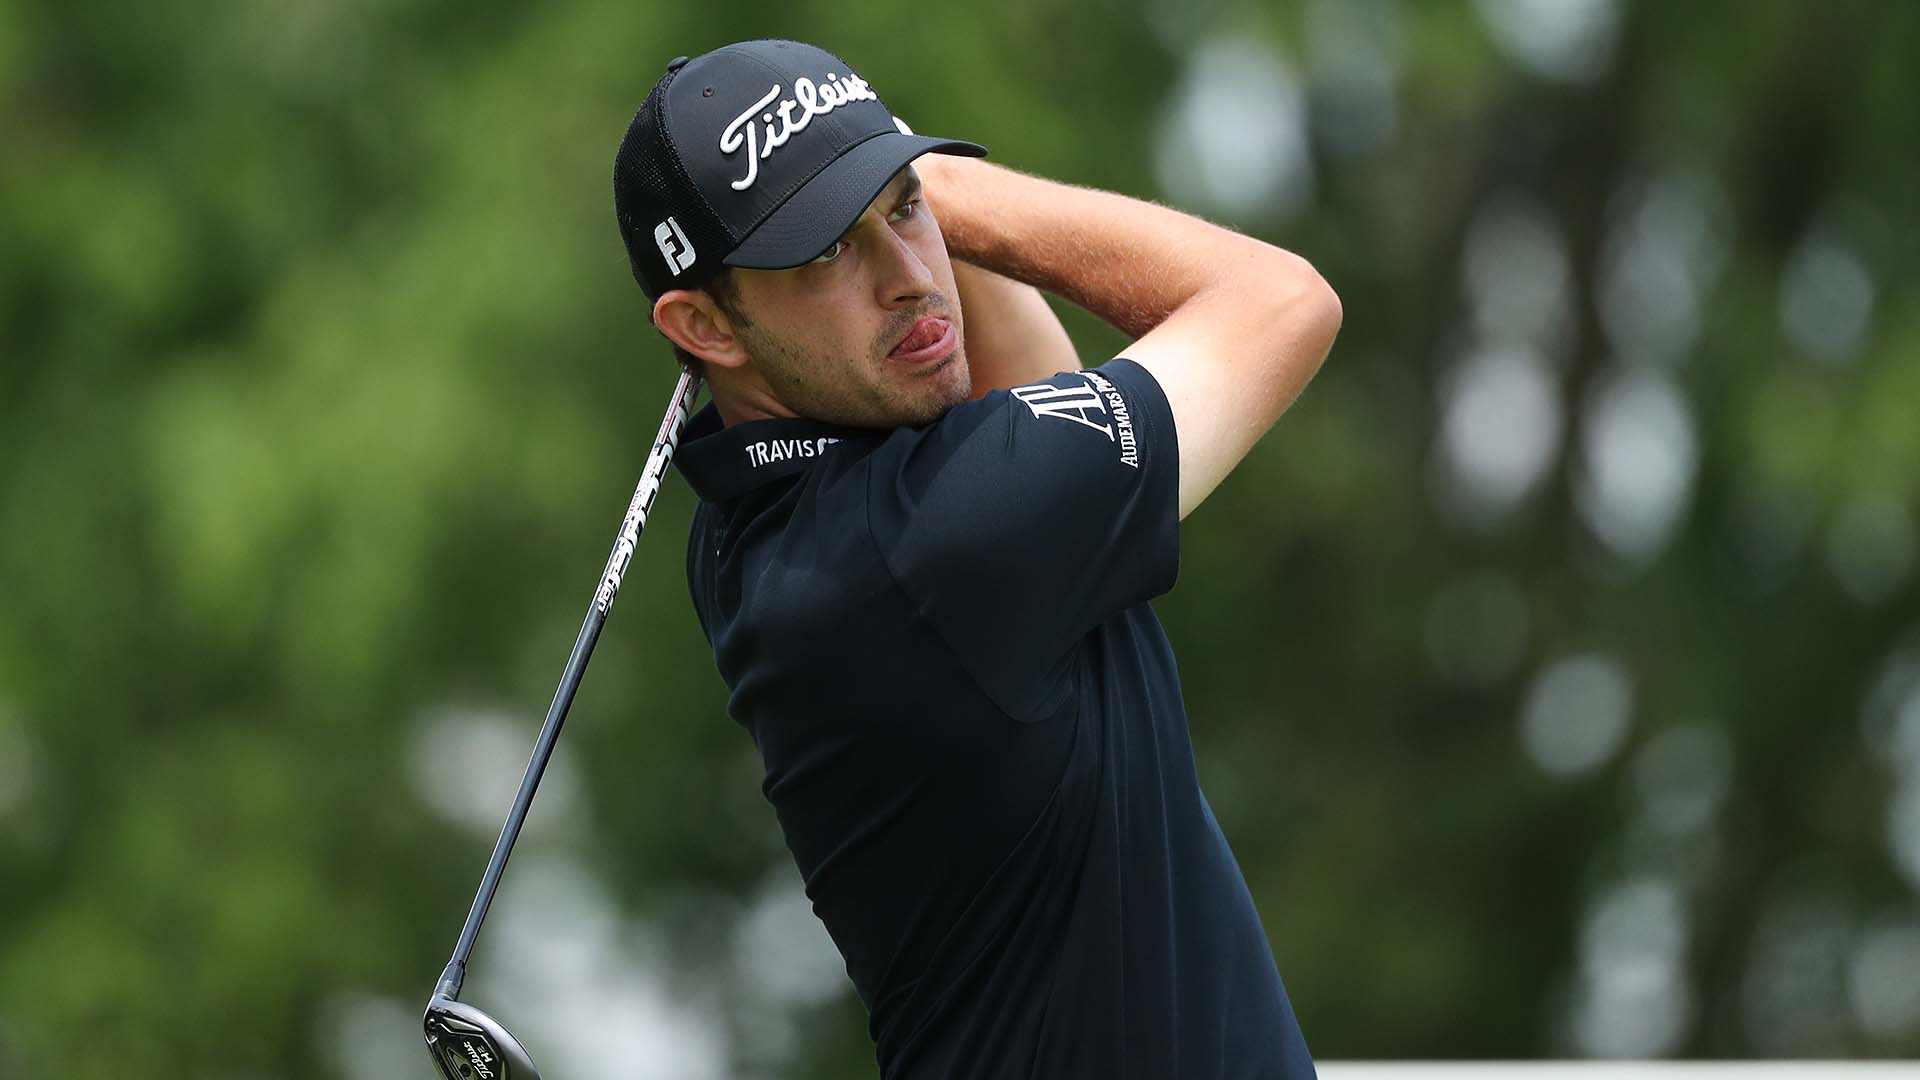 Patrick Cantlay Takes Over Heritage With Late Birdie Flurry